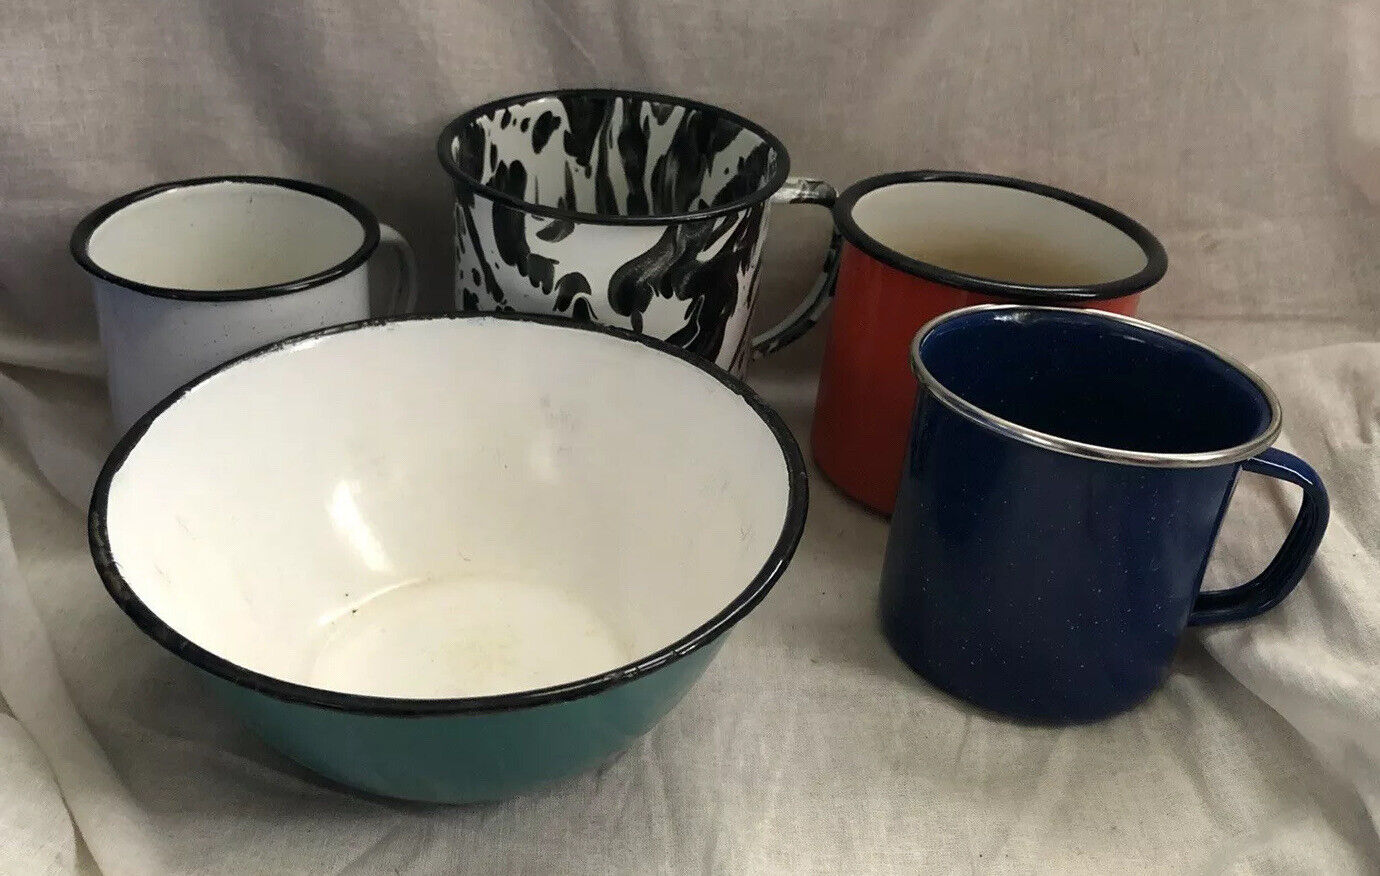 Lot of 4 Vintage Cups/Mugs & 1 Bowl Enamelware Farm House Multicolored Dishes